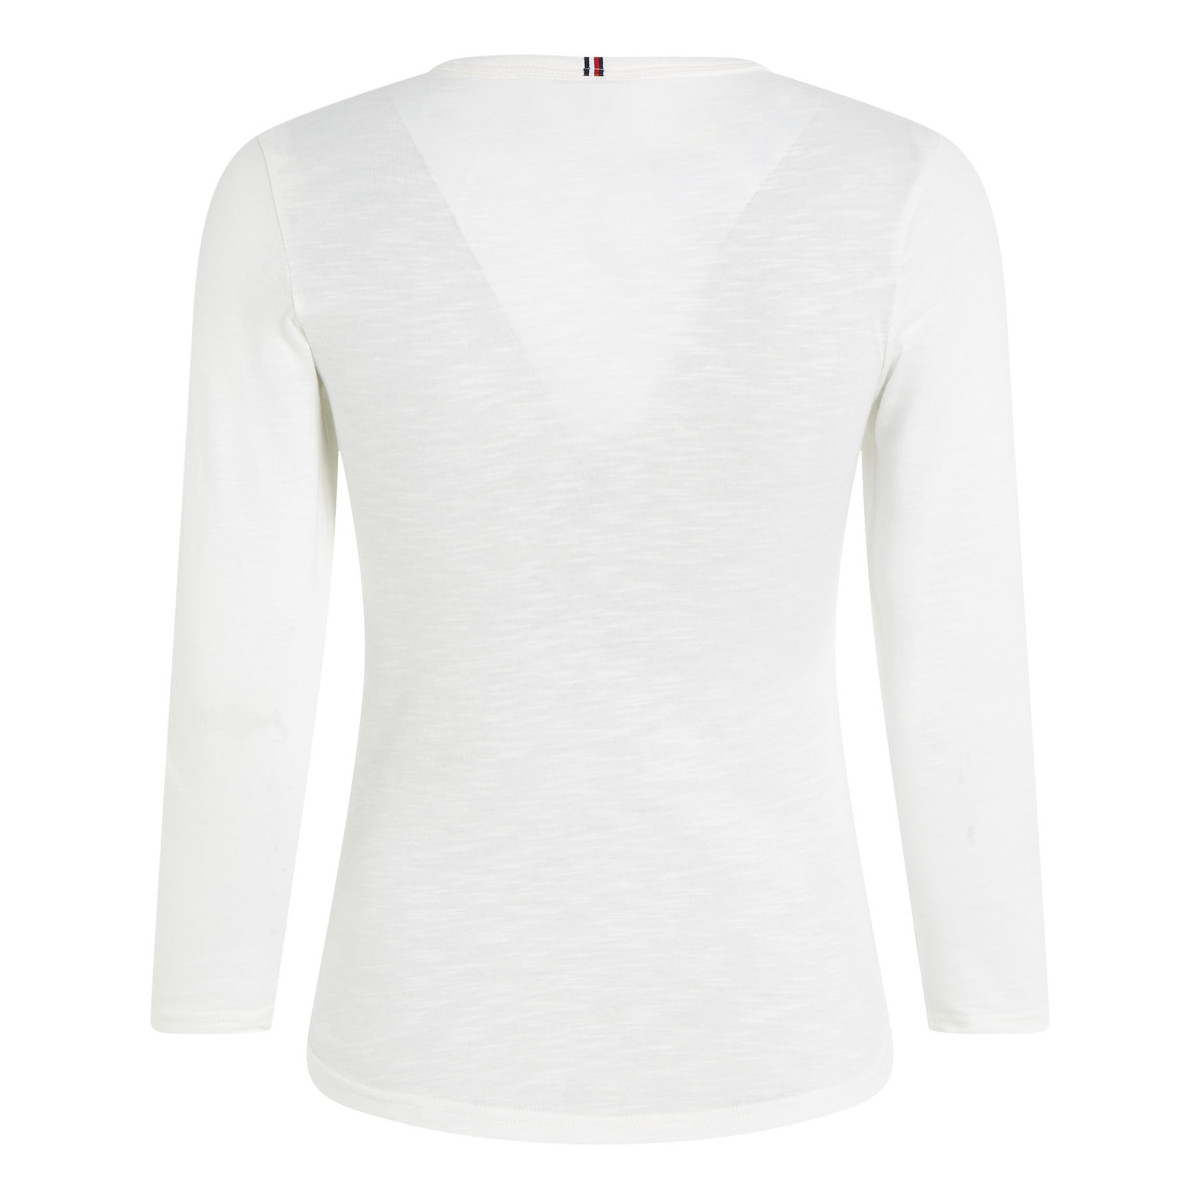 M02-WOMEN-OTHER KNIT TOPS